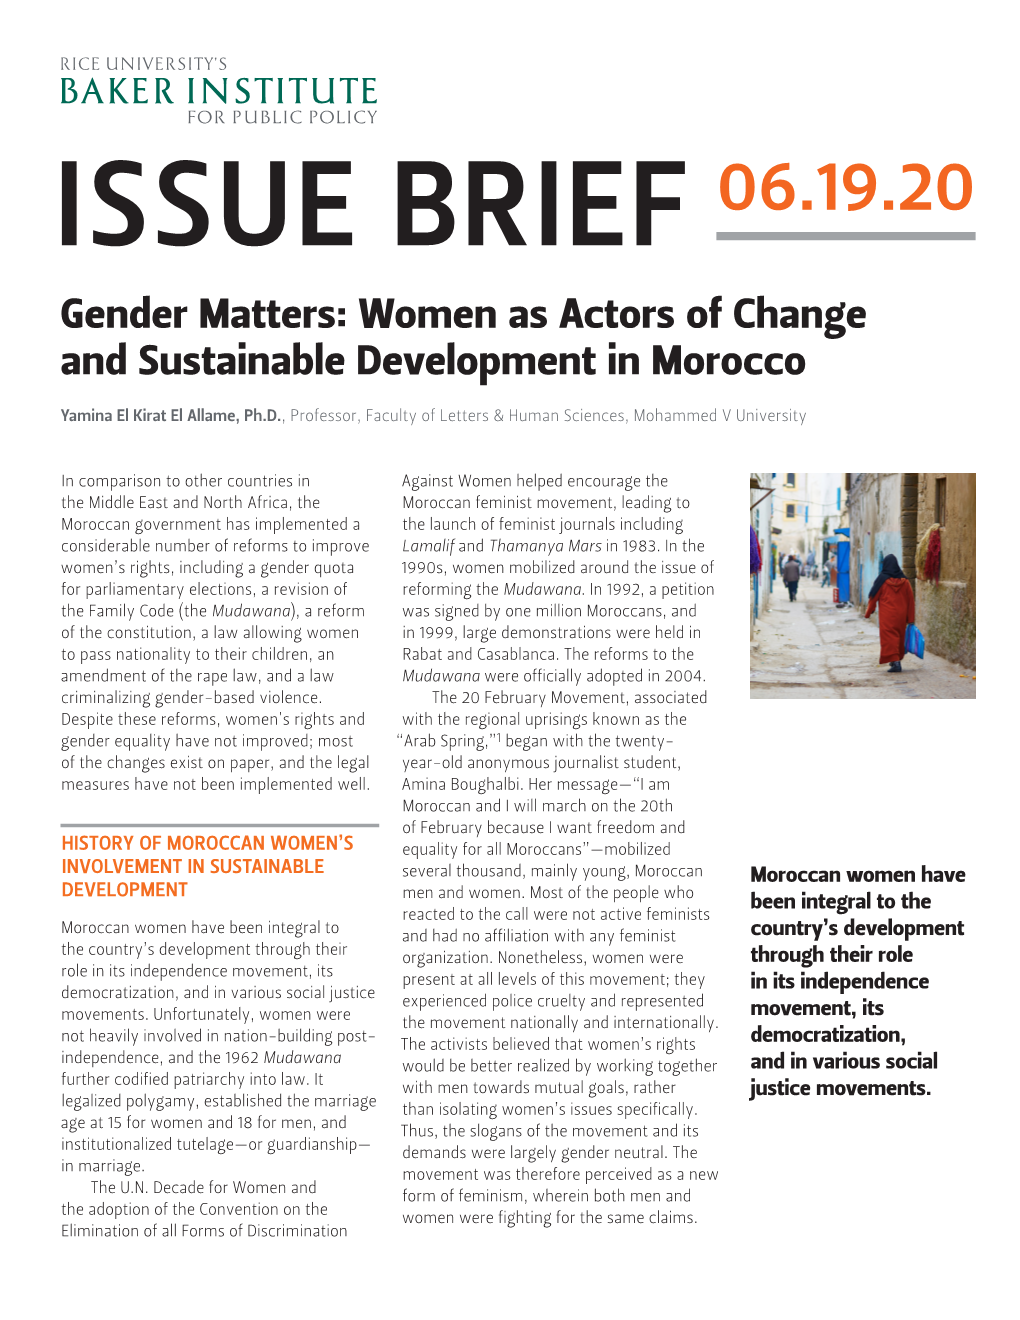 Gender Matters: Women As Actors of Change and Sustainable Development in Morocco